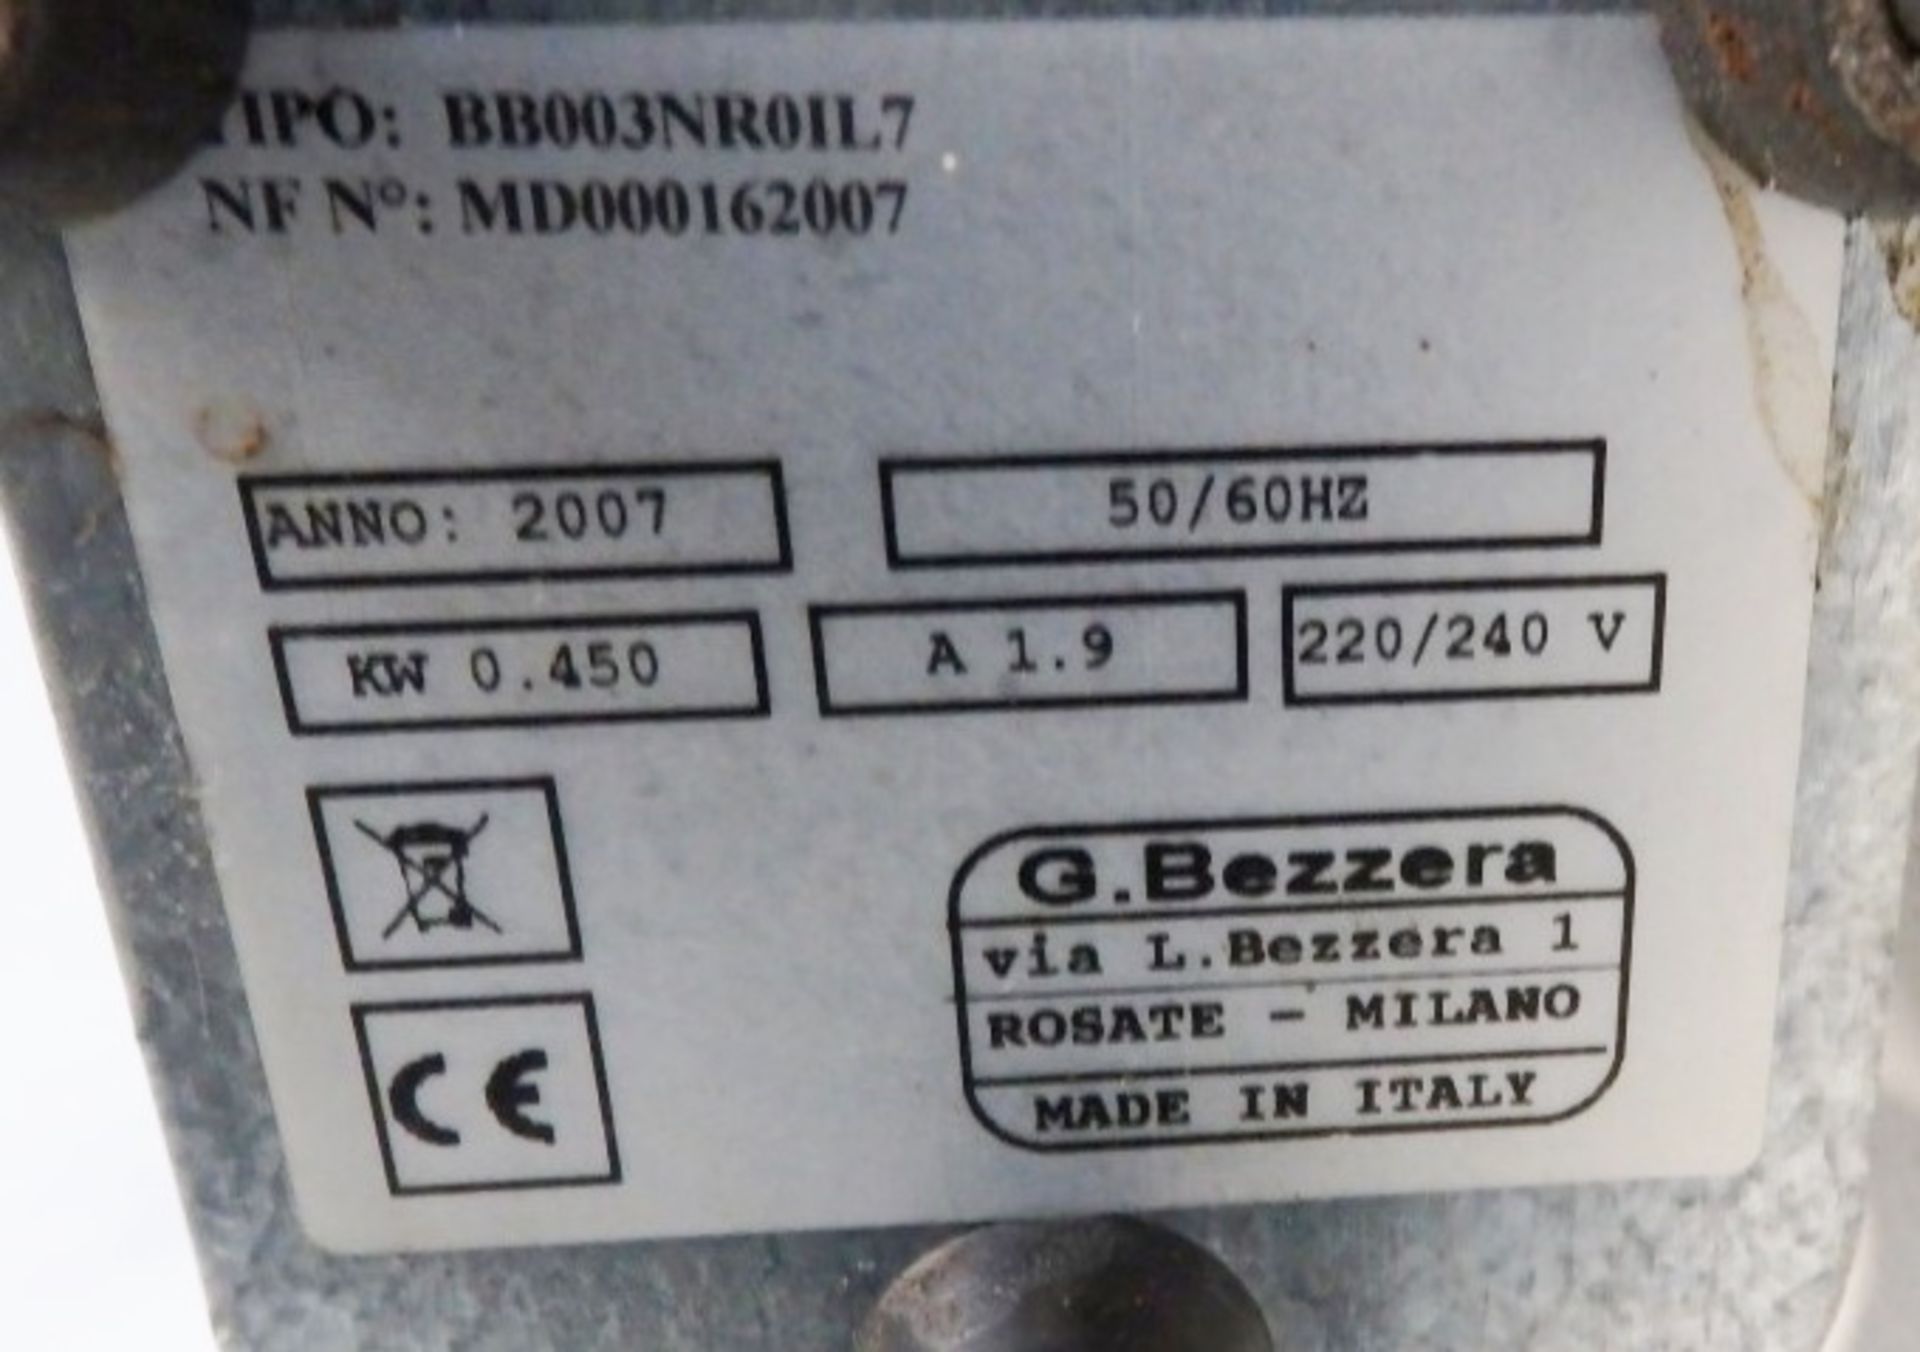 1 x Bezzera Commercial Coffee Grinder (Model BB003) - Stainless Steel AISI 304 Body - Capacity: - Image 7 of 8